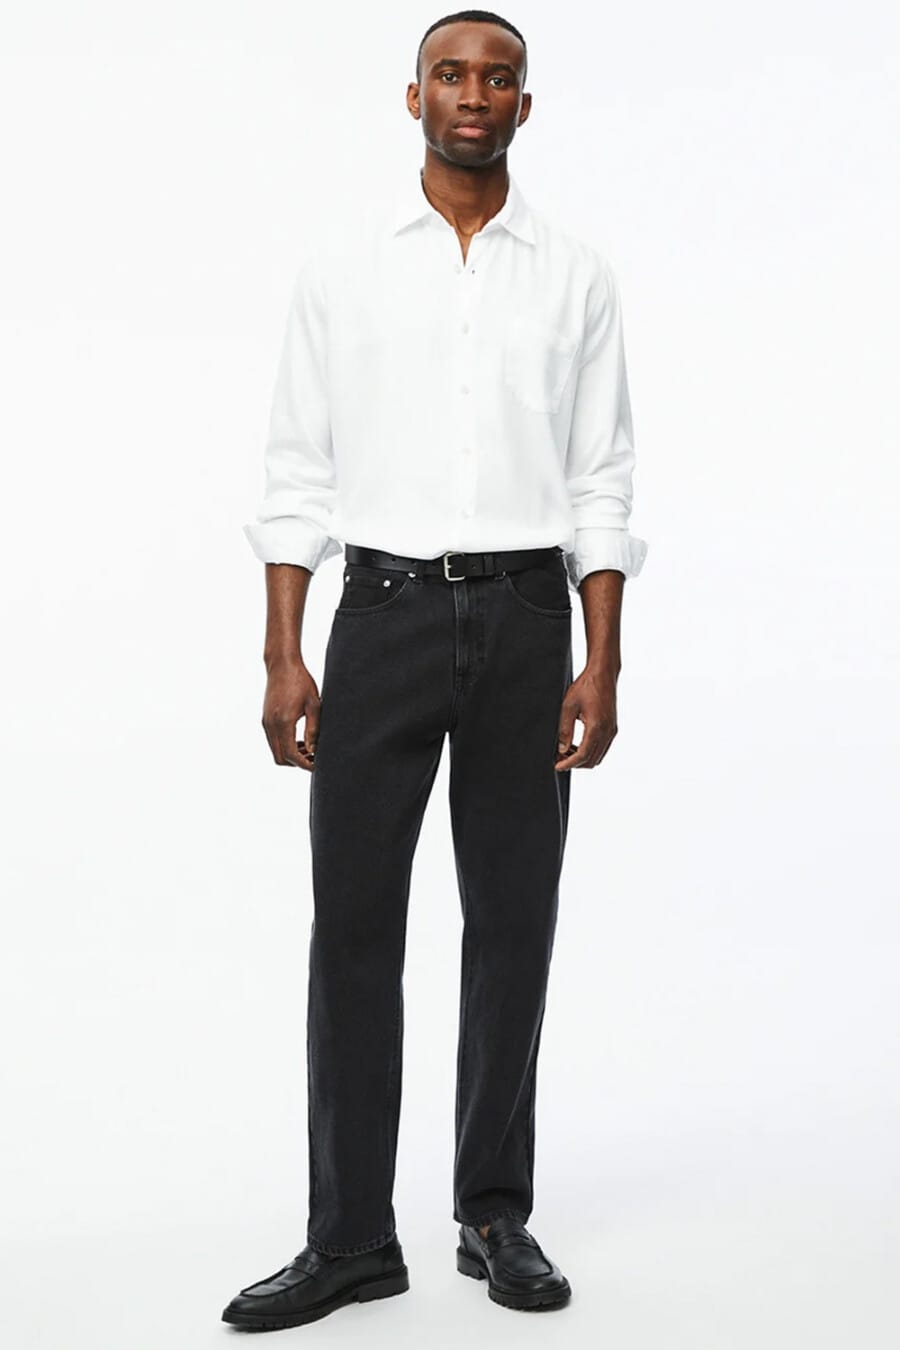 Men's white shirt tucked into black jeans with black leather belt and black leather penny loafers outfit 